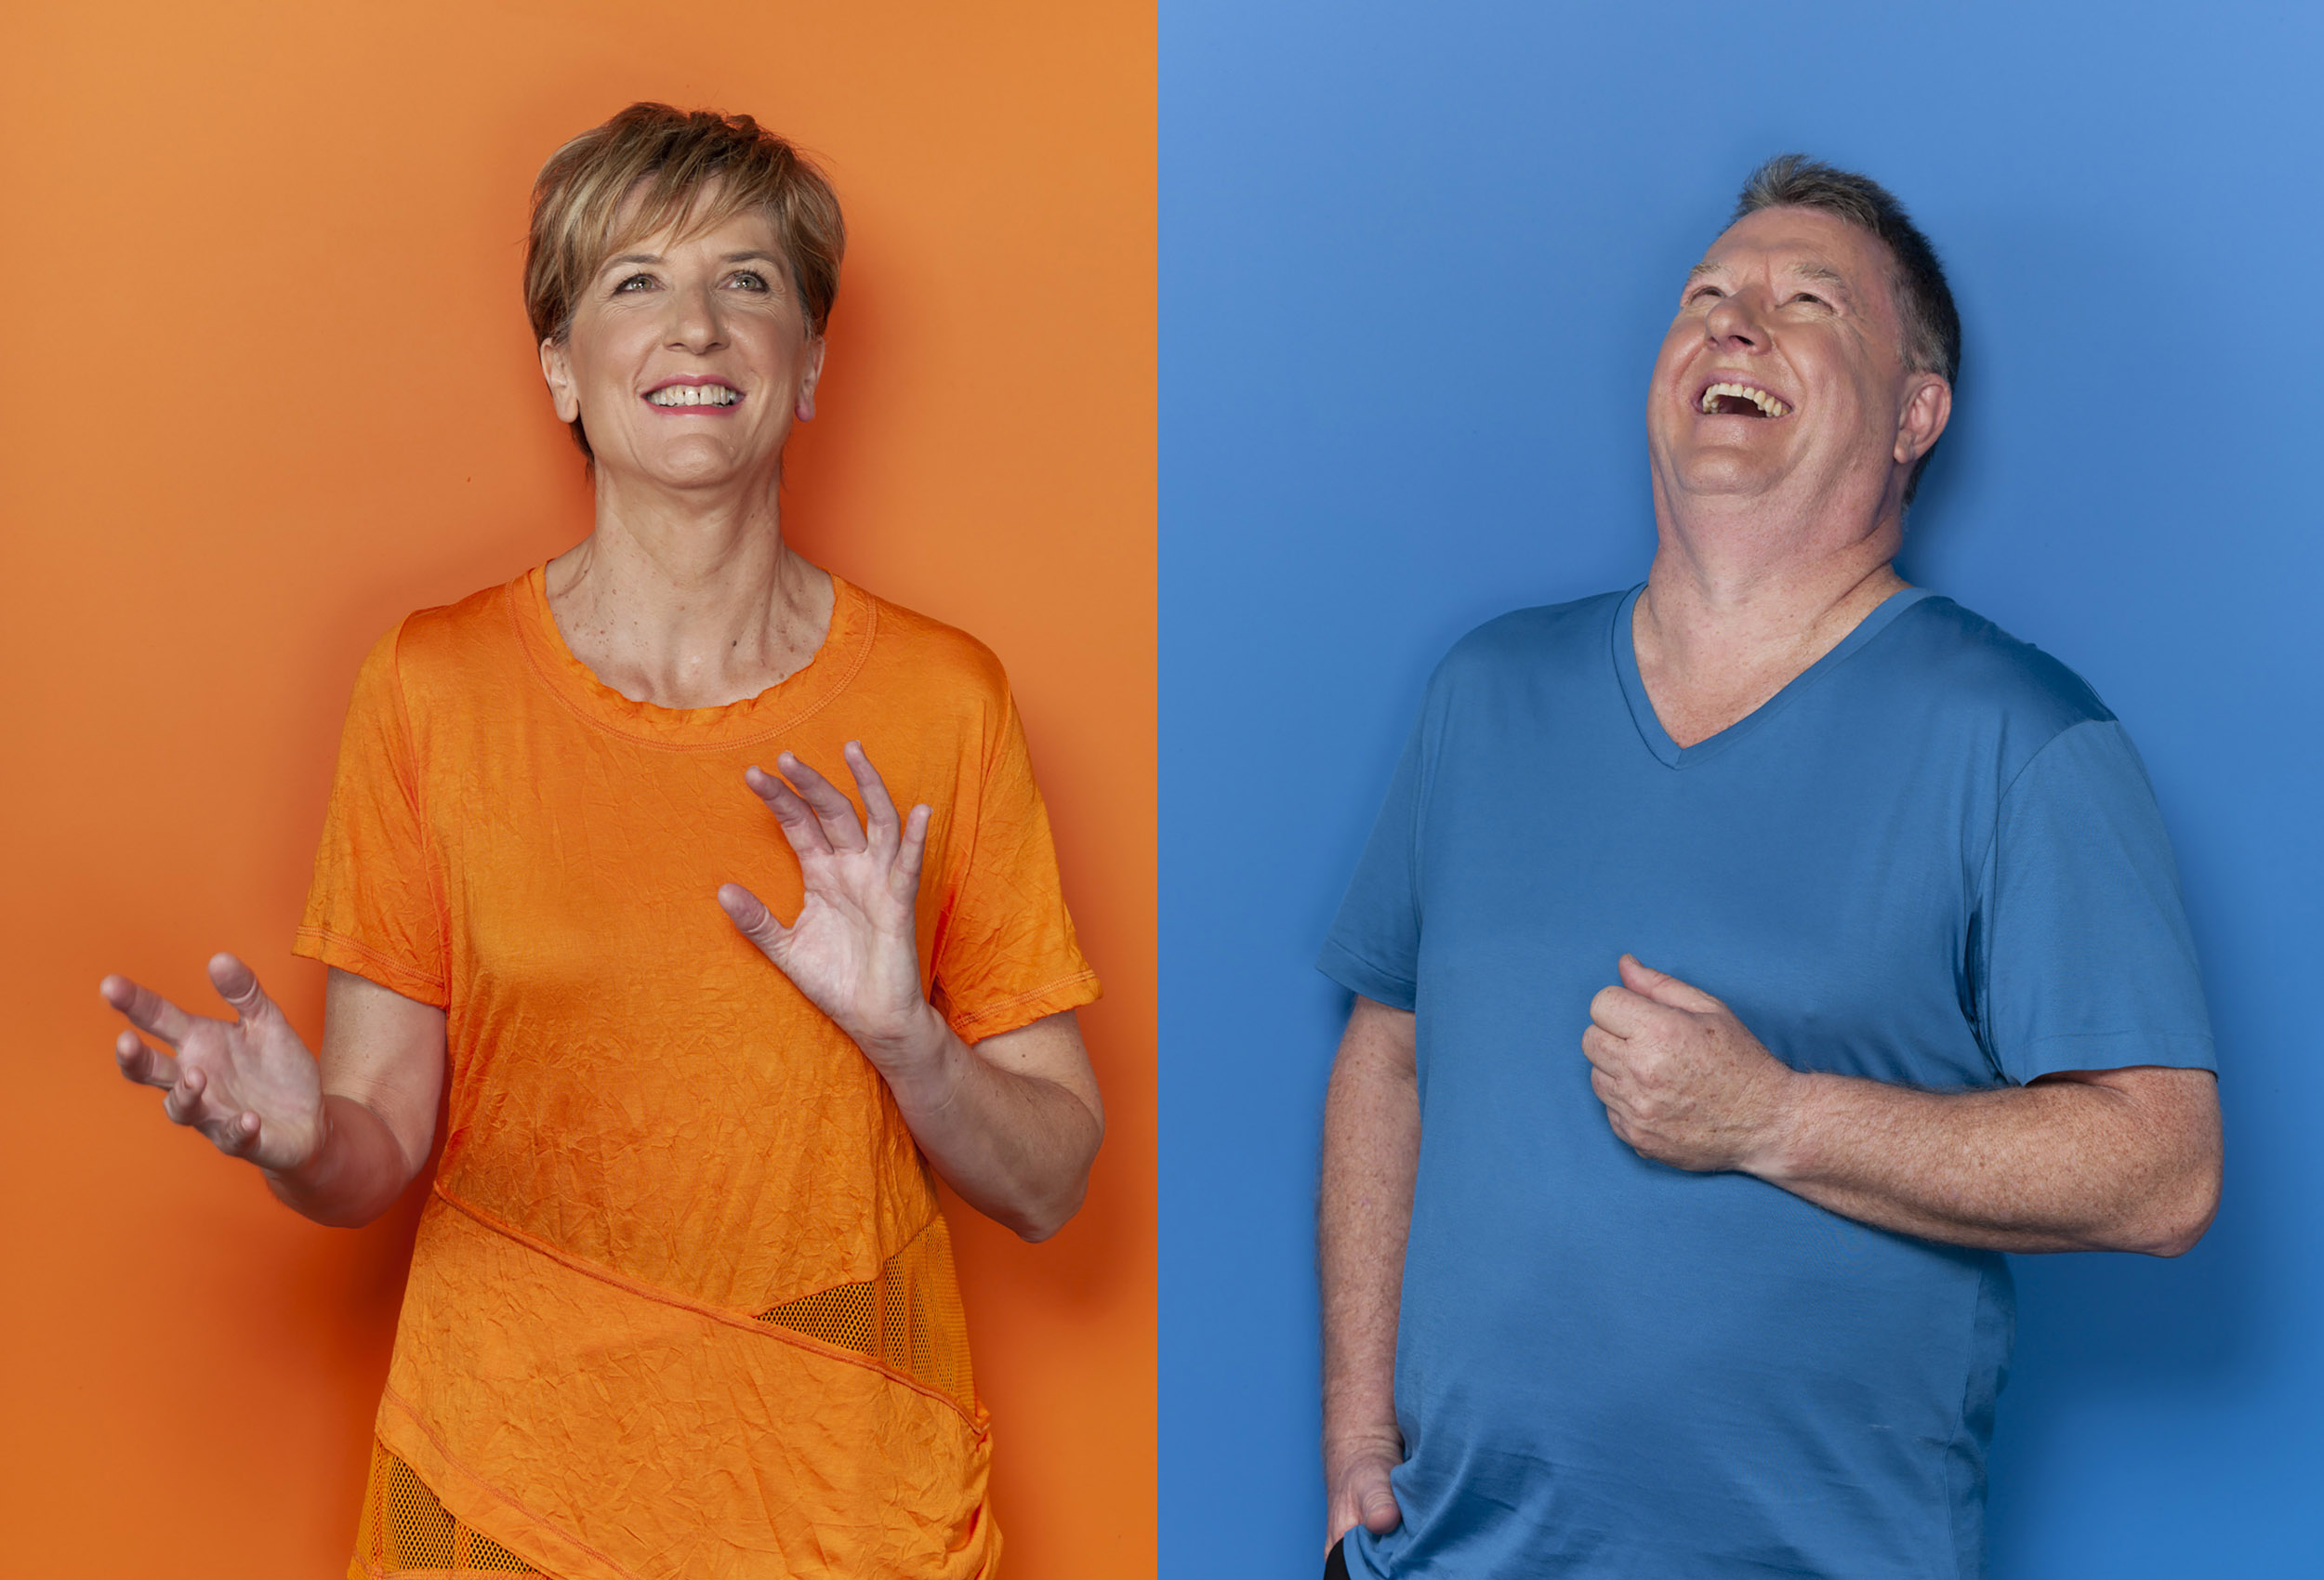 Paul Scott, people, woman on orange and man on blue backgrounds.